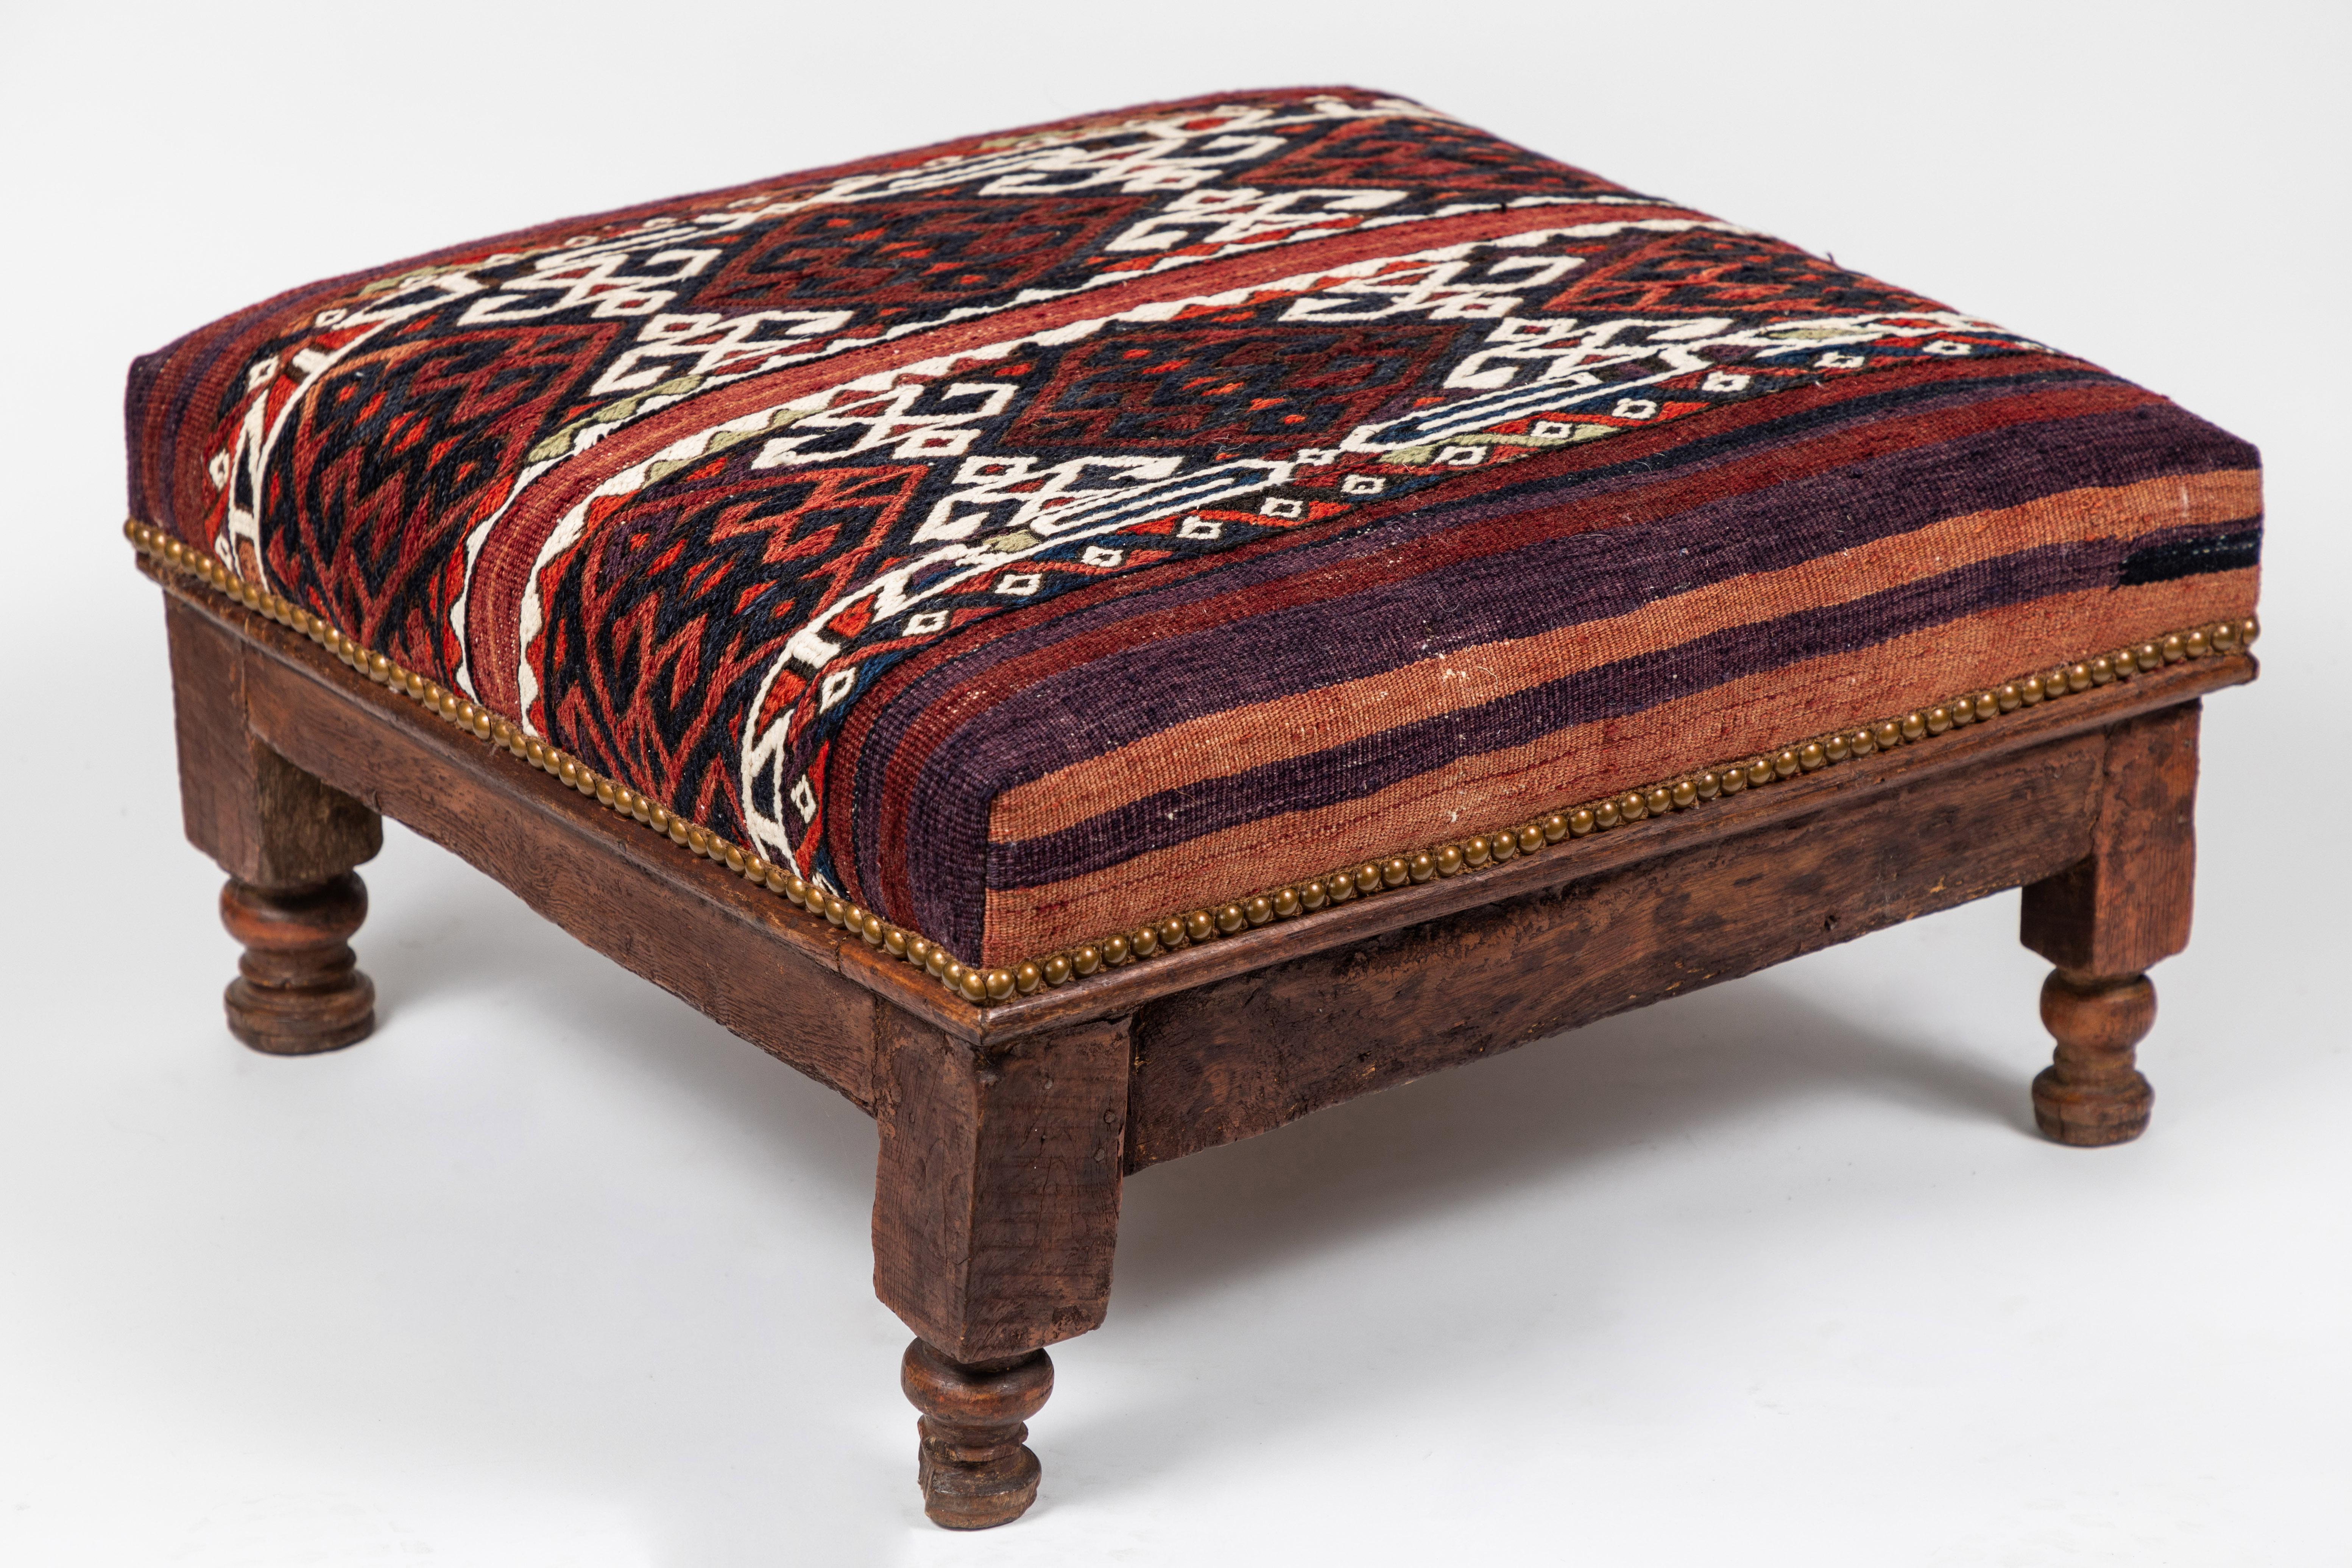 Vintage Wood Foot Stool Newly Upholstered in a Vintage Wool Rug from Turkey 2